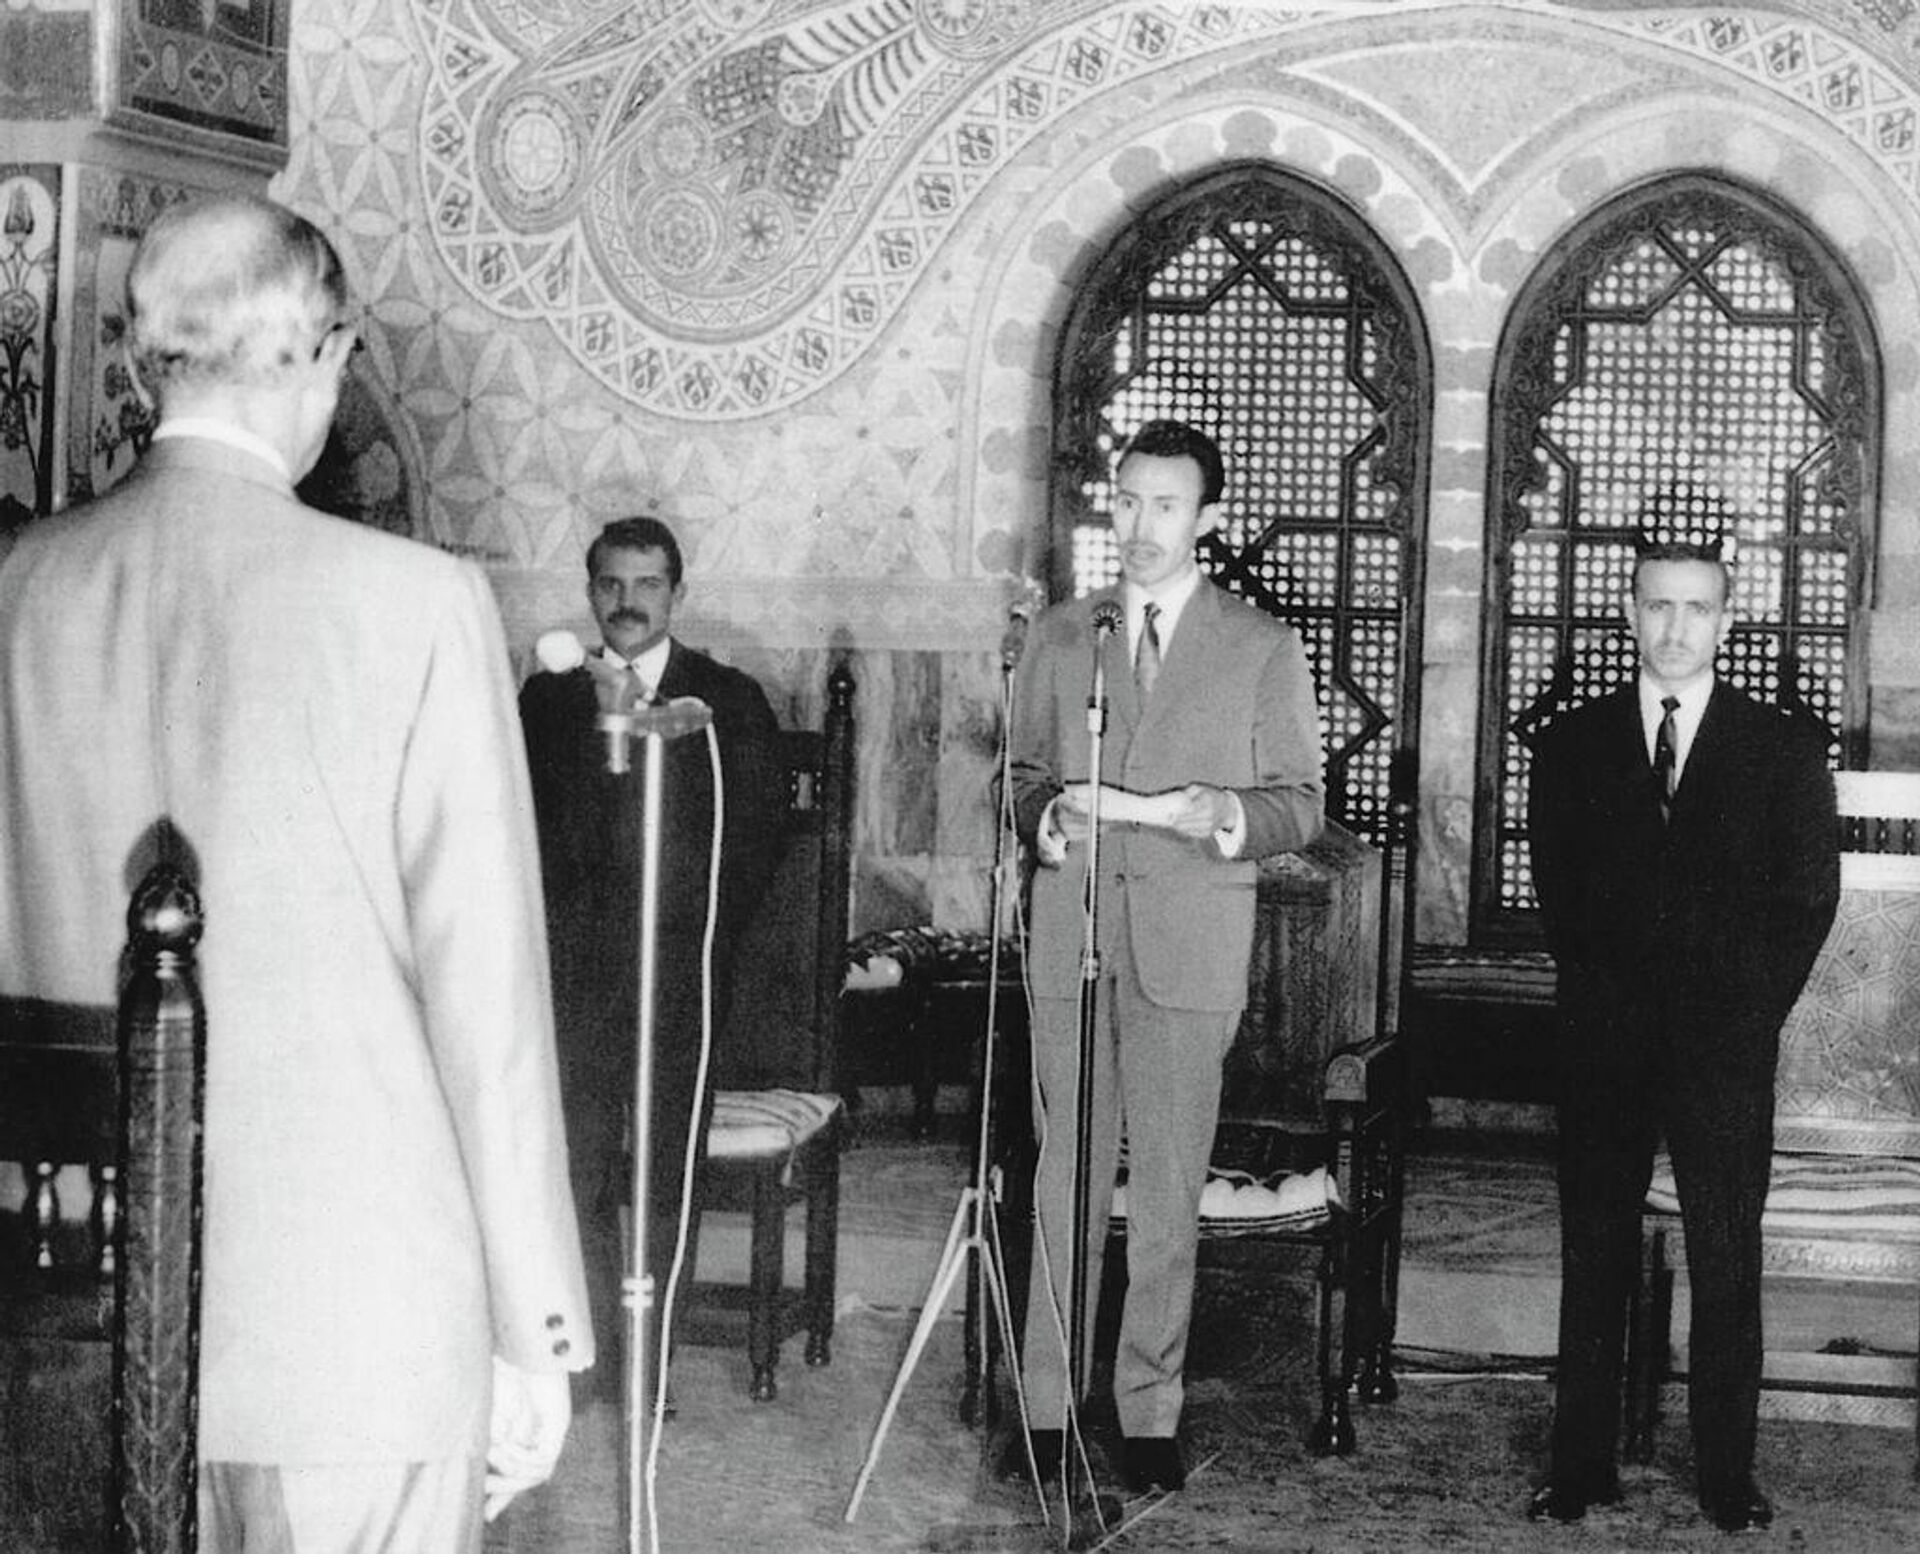 A public ceremony in 1967 at which the US ambassador presents his credentials to members of the Algerian government, including Foreign Minister Abdelaziz Bouteflika (L), President Houari Boumedienne (C) and Chief of Staff of the President Djelloul Khatib (R). - Sputnik International, 1920, 17.09.2021